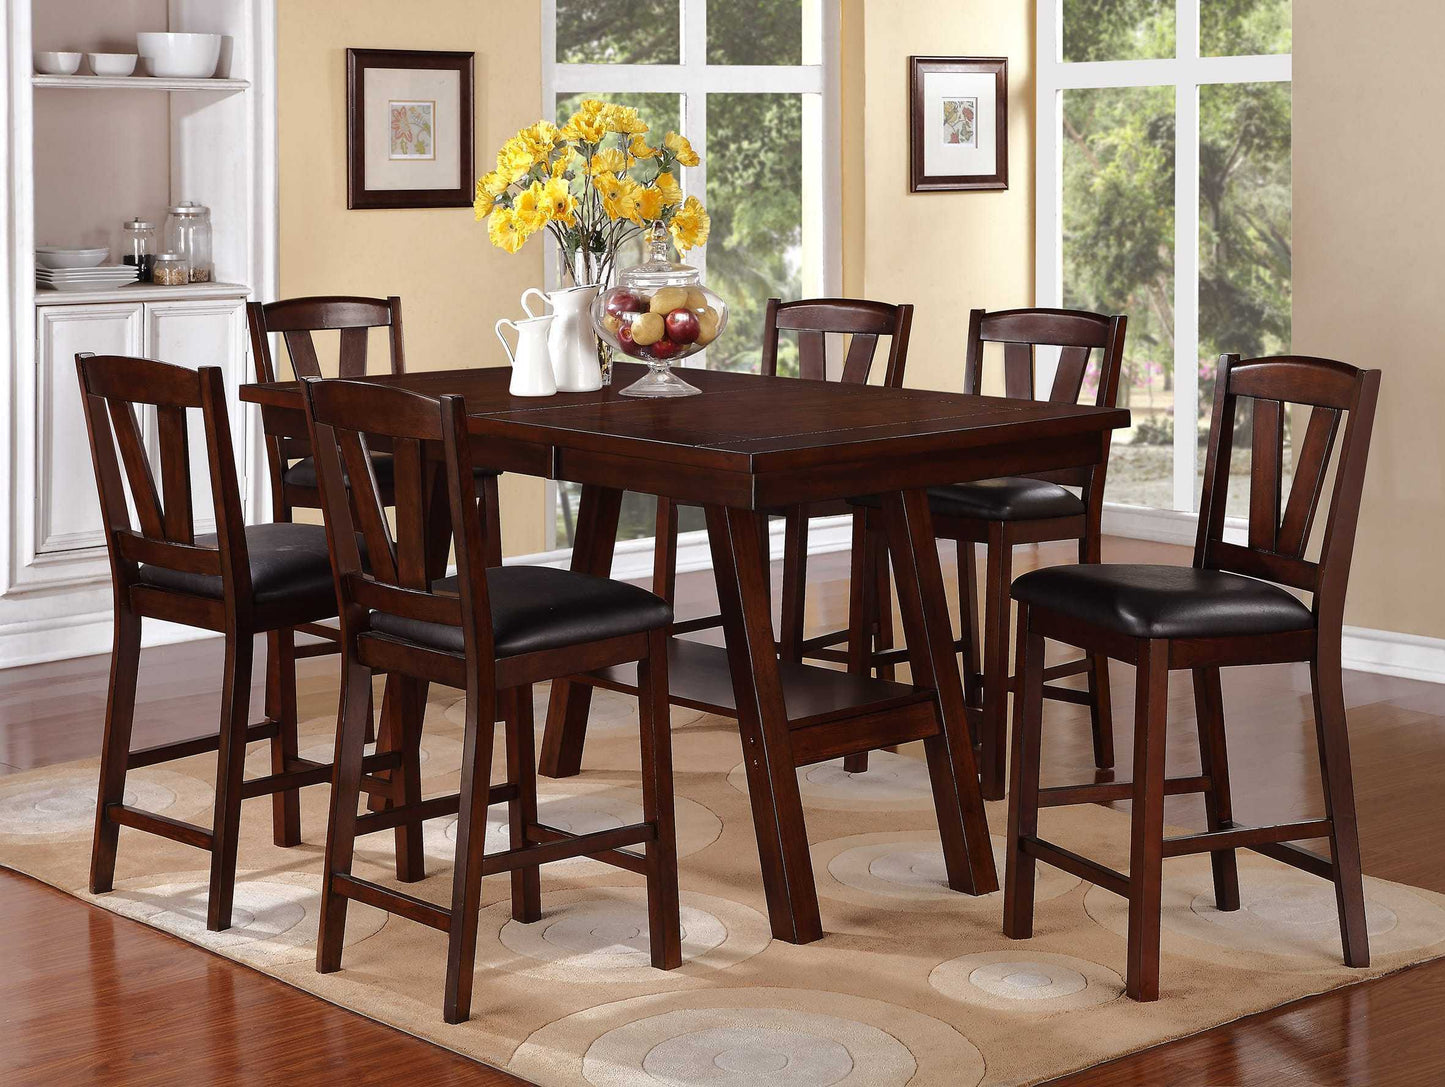 Dark Walnut Wood Framed Back Set of 2 Counter Height Dining Chairs Breakfast Kitchen Cushion Seats